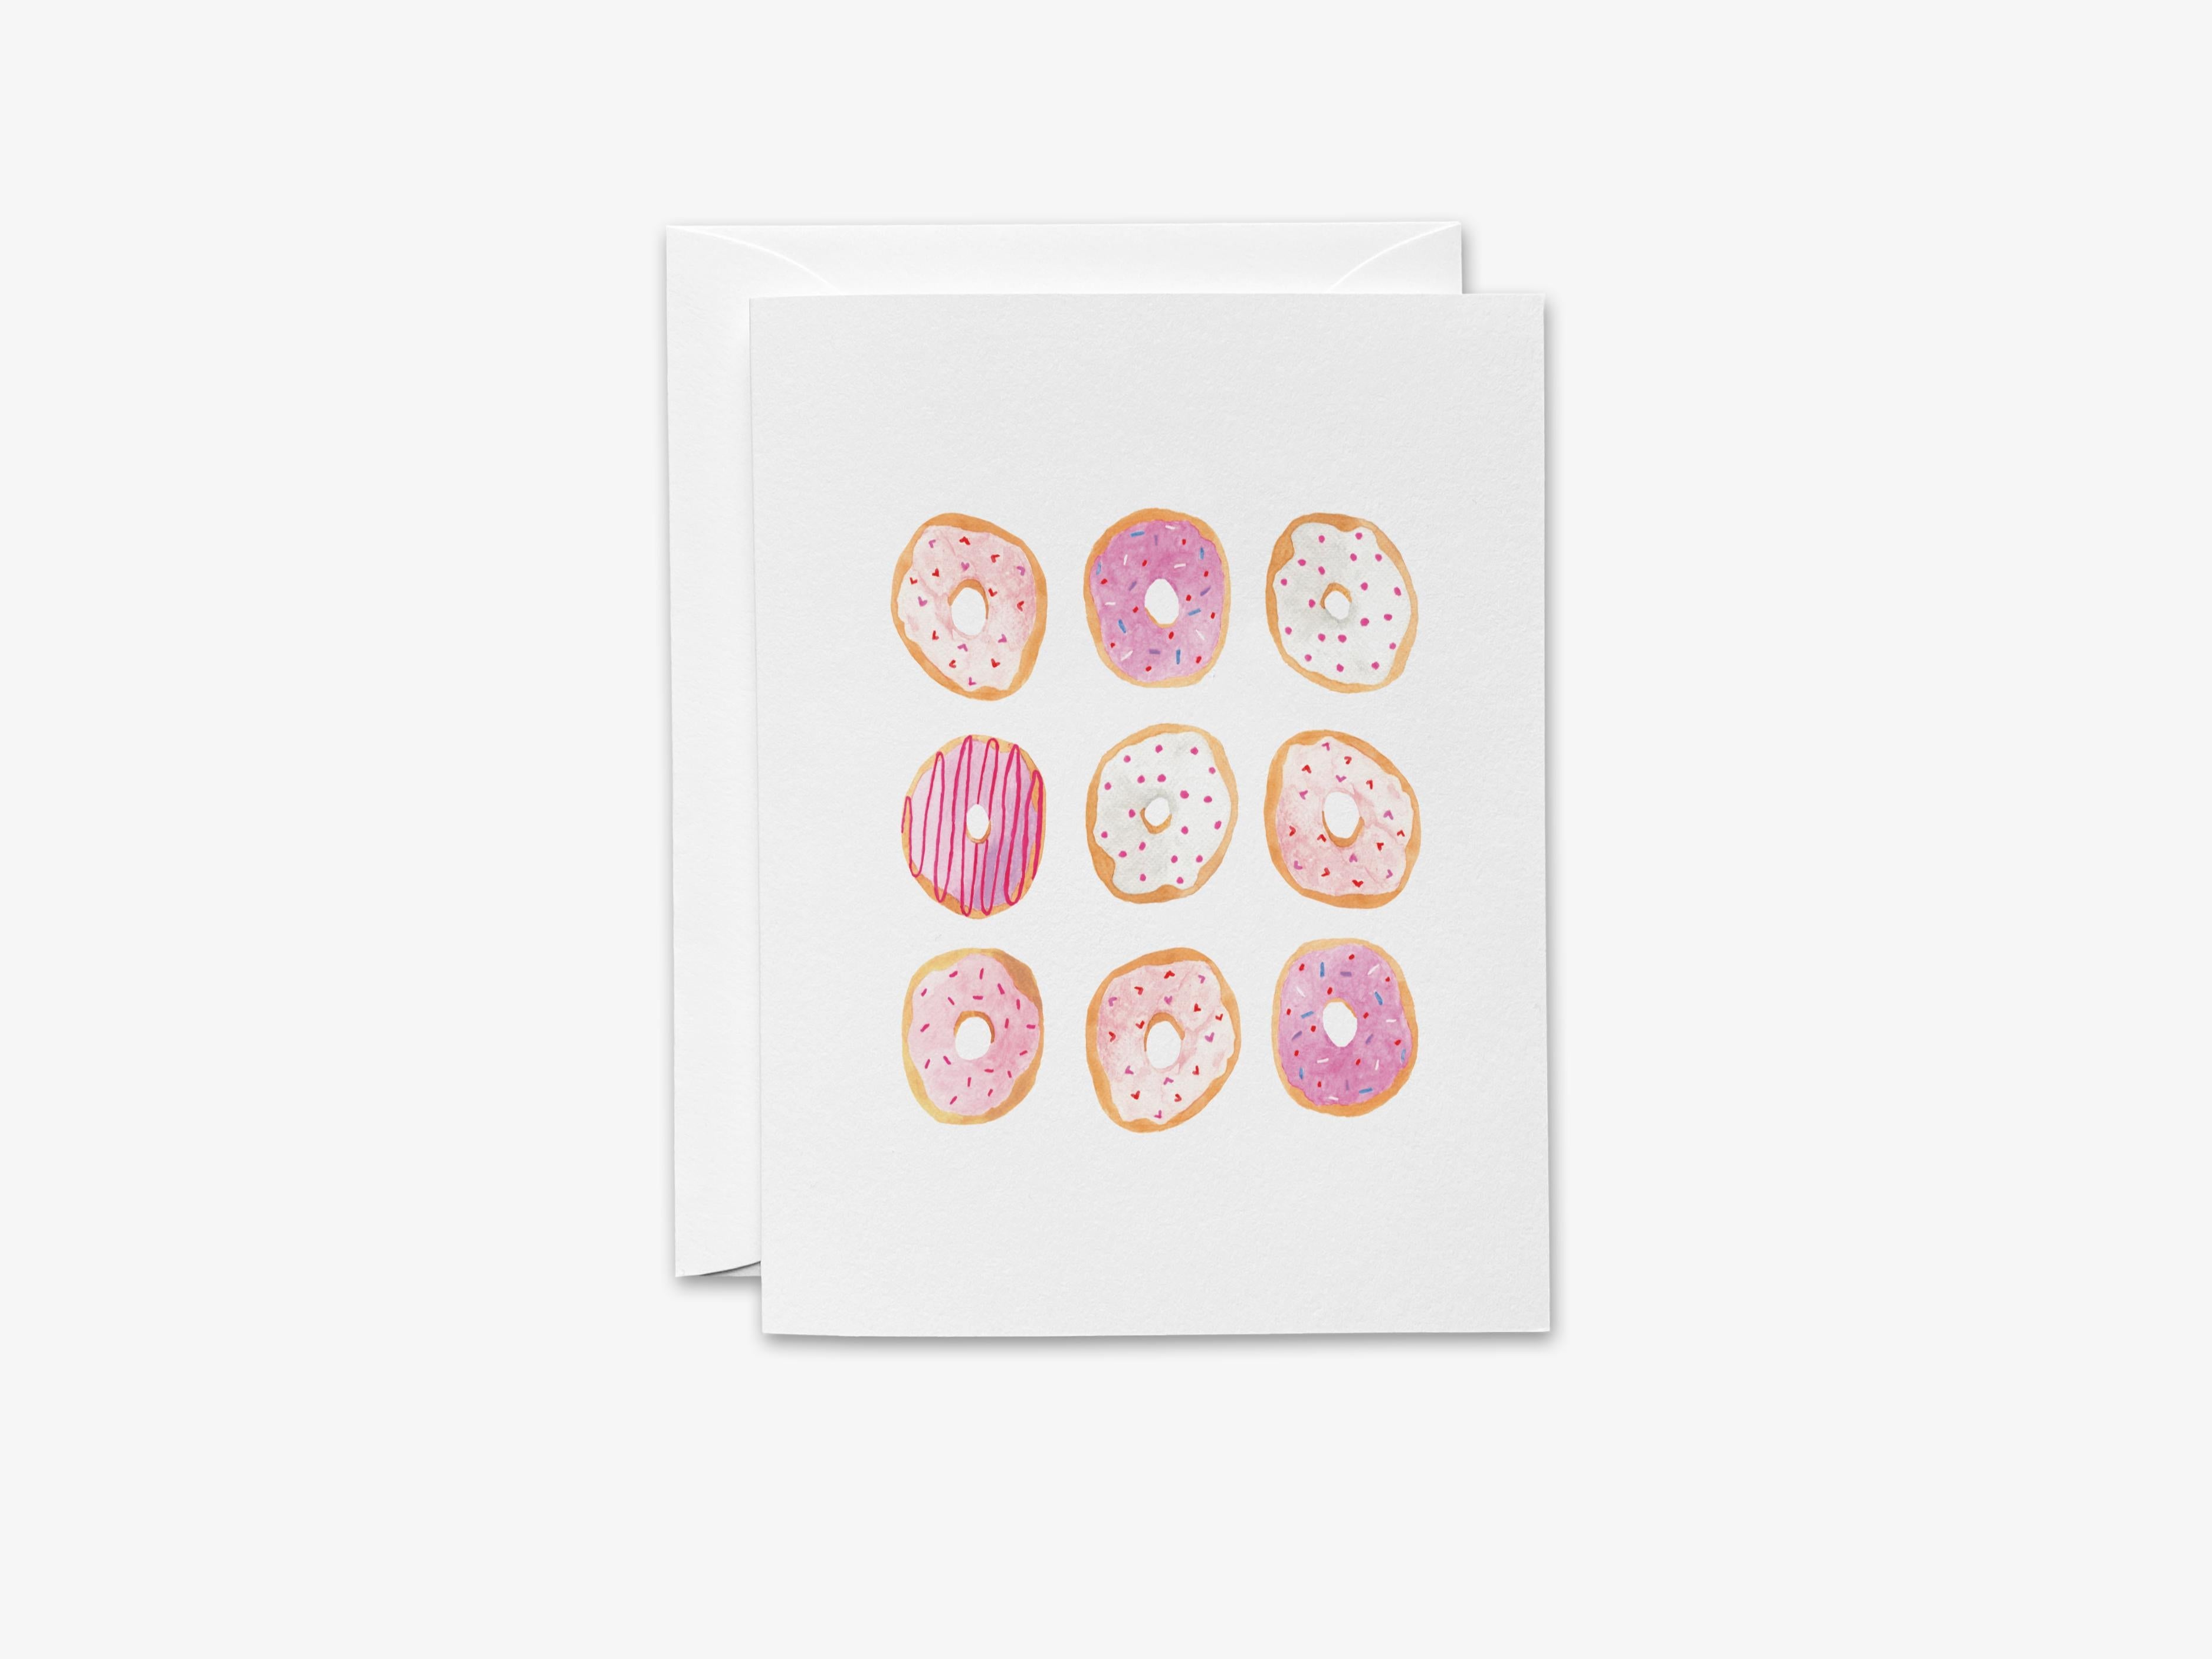 Donut Greeting Card-These folded greeting cards 4.25x5.5 and feature our hand-painted donut, printed in the USA on 100lb textured stock. They come with a White envelope and make a great thinking of you card for the sweet tooth lover in your life.-The Singing Little Bird